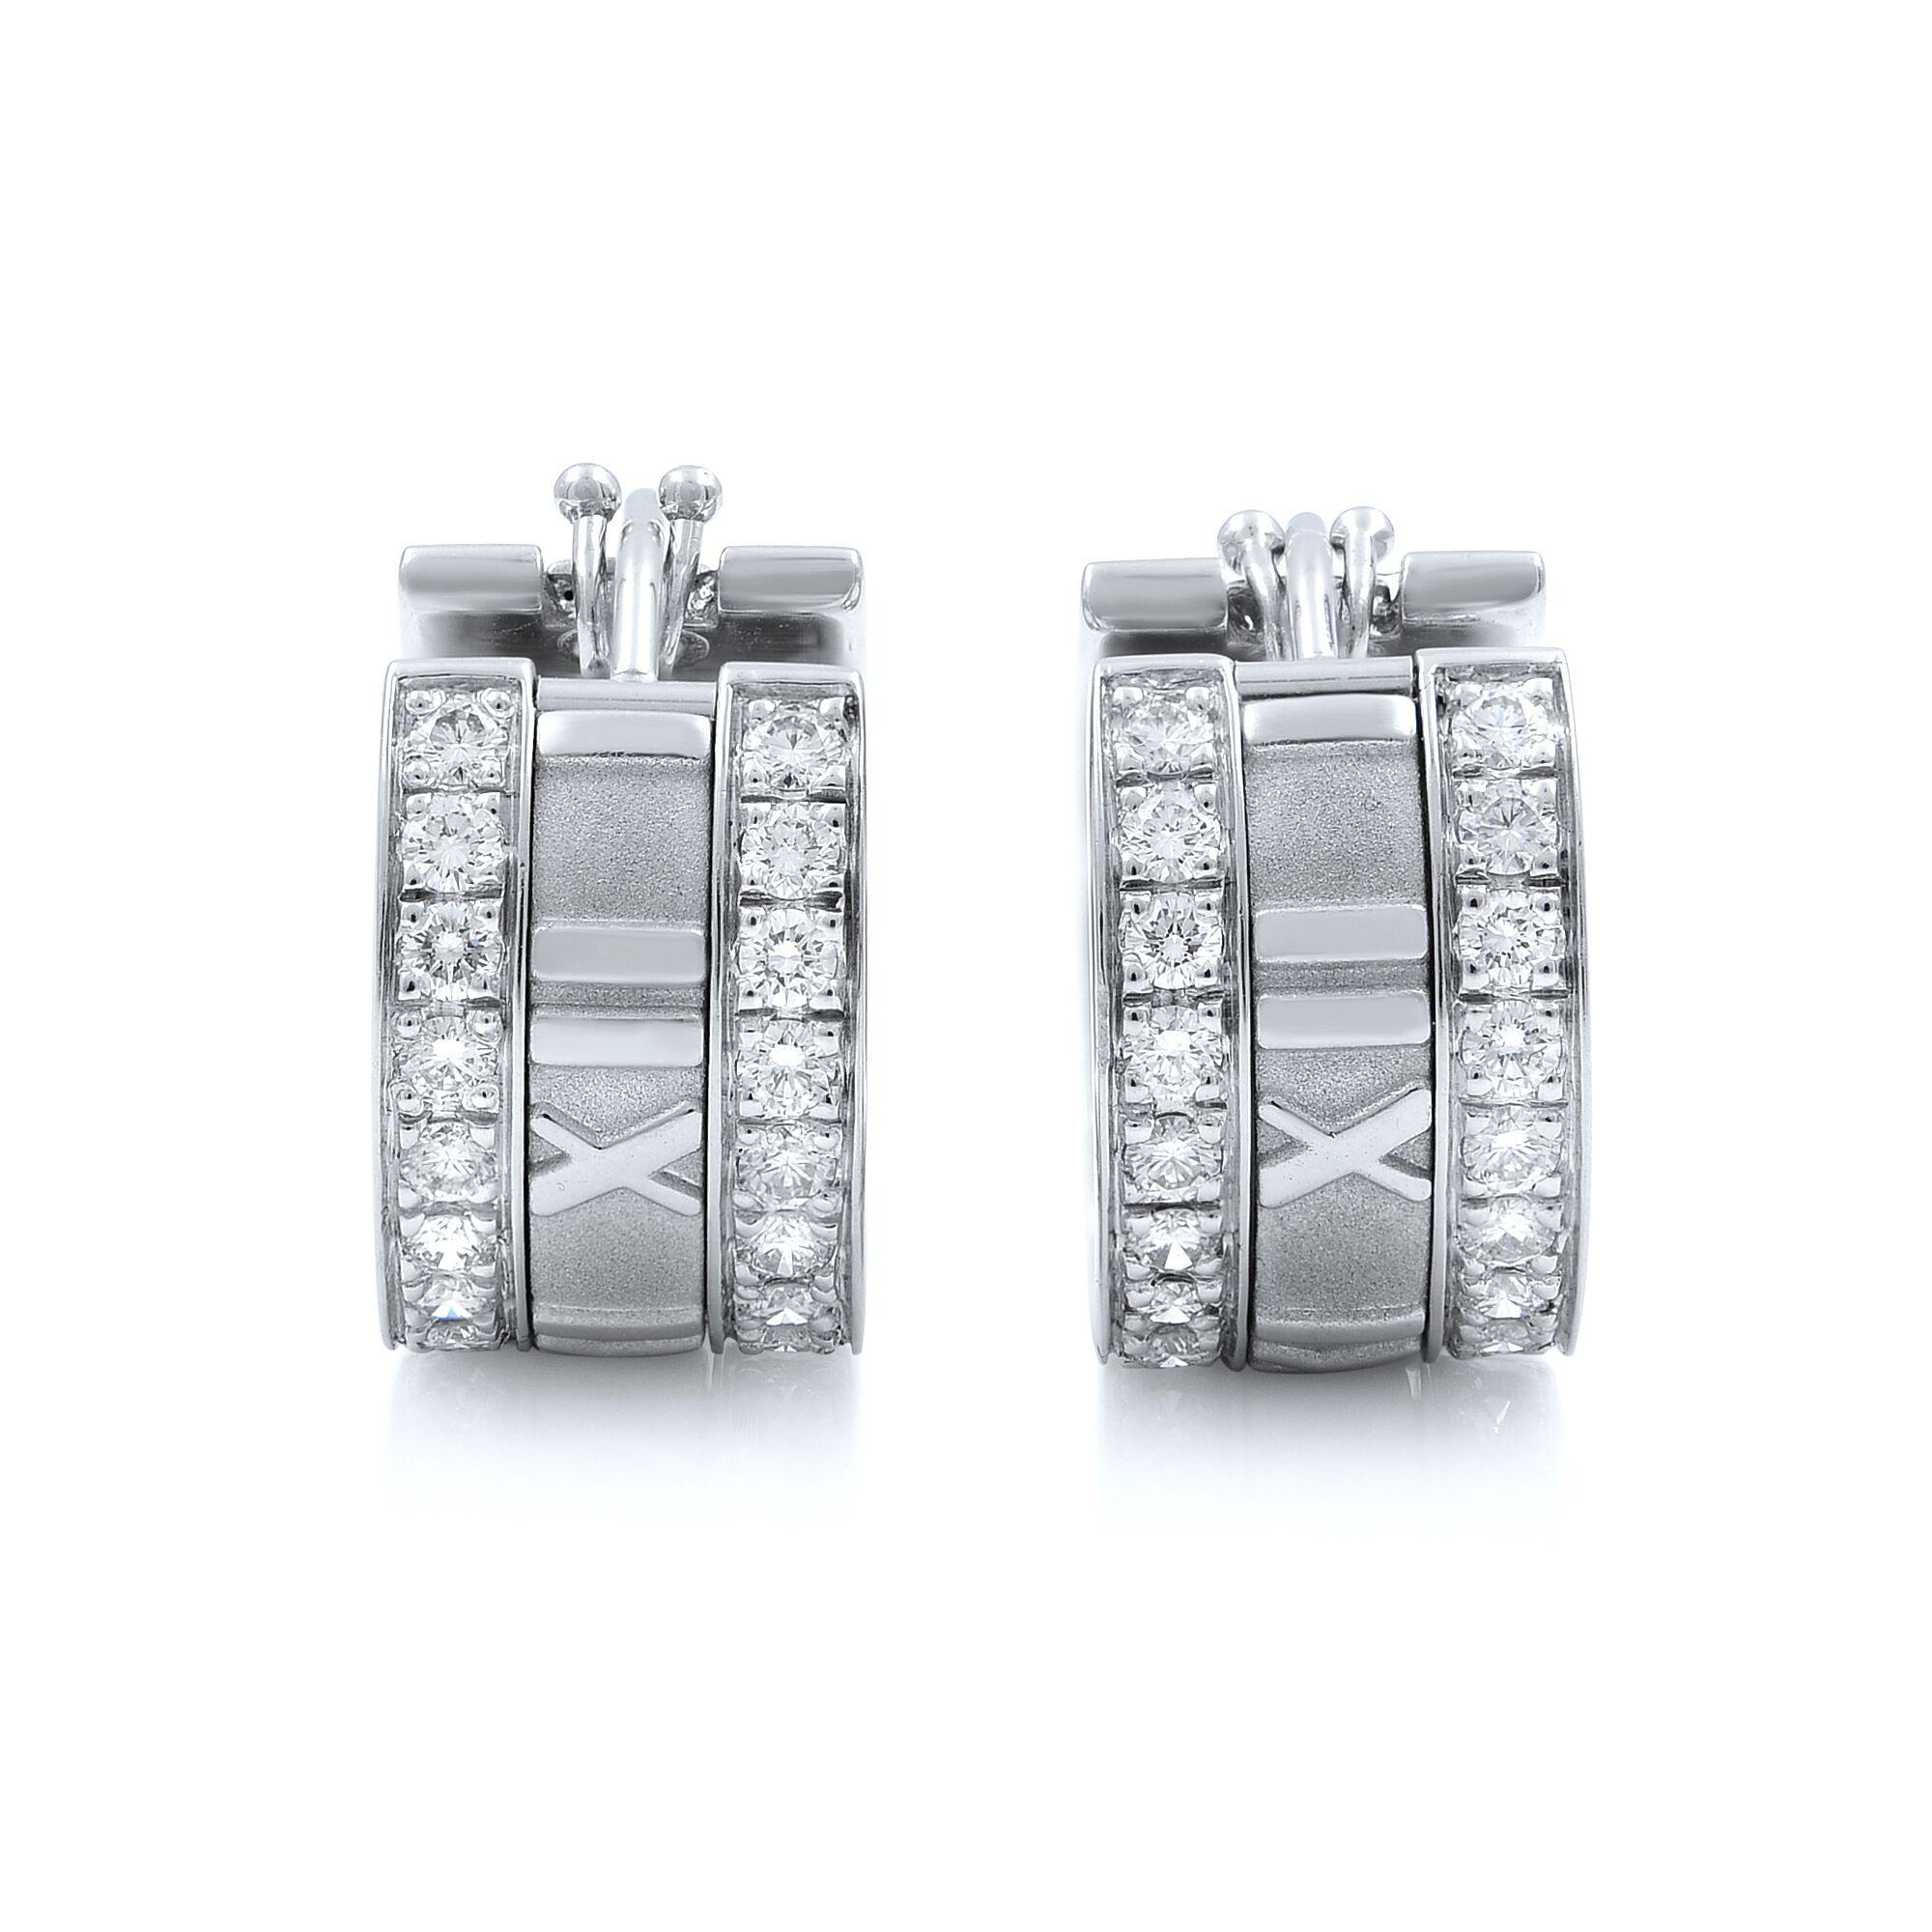 Tiffany & Co white gold diamond earrings from Atlas collection. They are crafted in solid 18kt white gold with polished and textured finish. Small wide band huggie design and a round cut sparkling diamond adorned on the front edge of the earrings